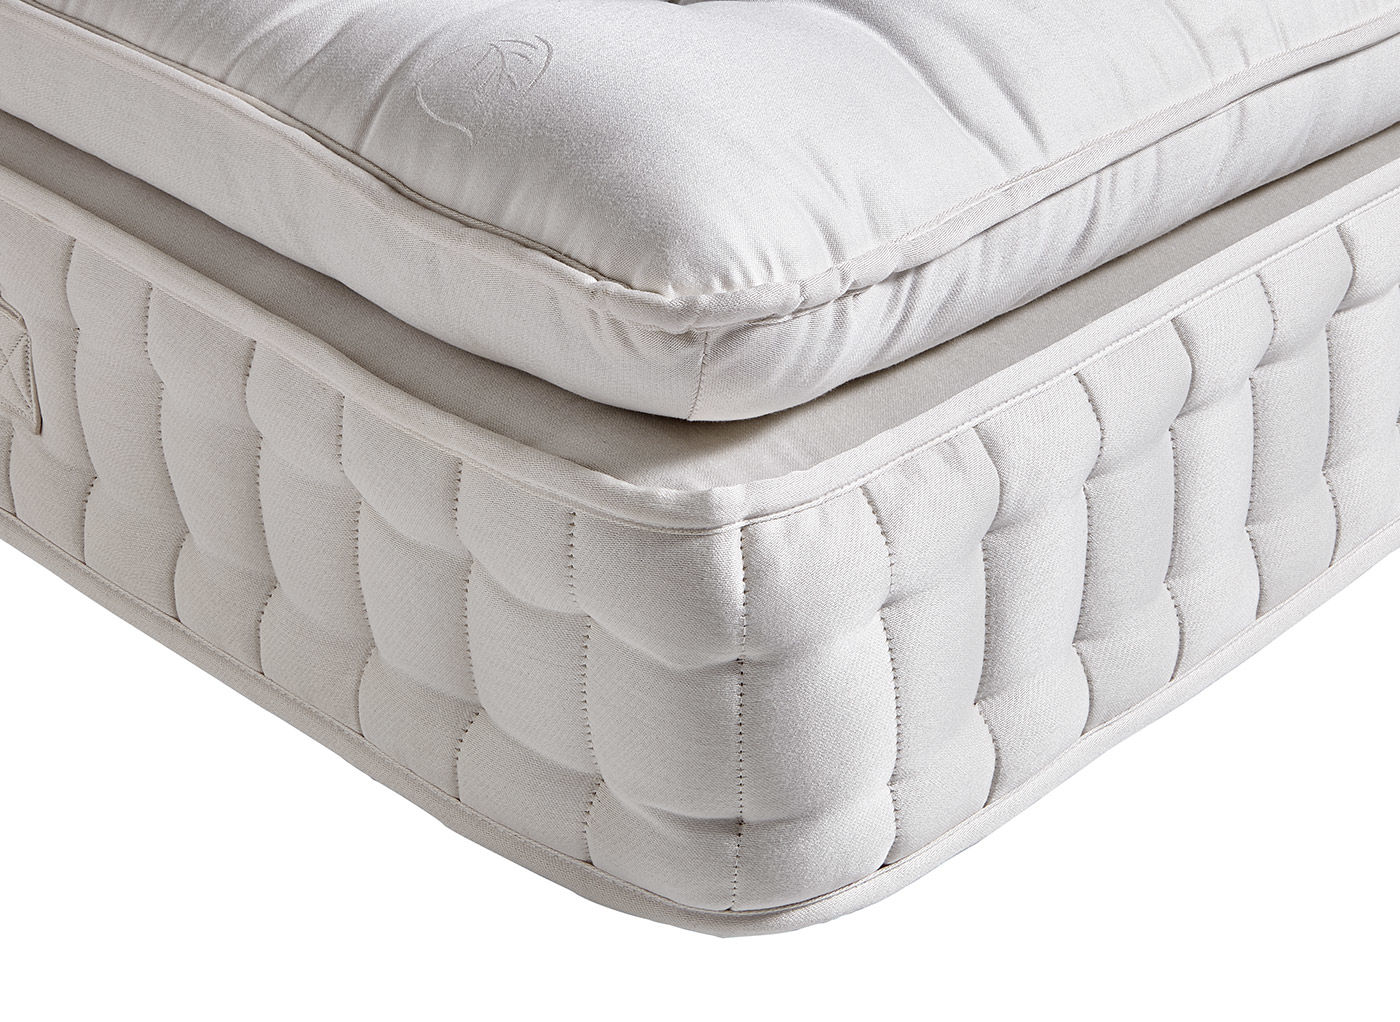 flaxby mattress 8500 review